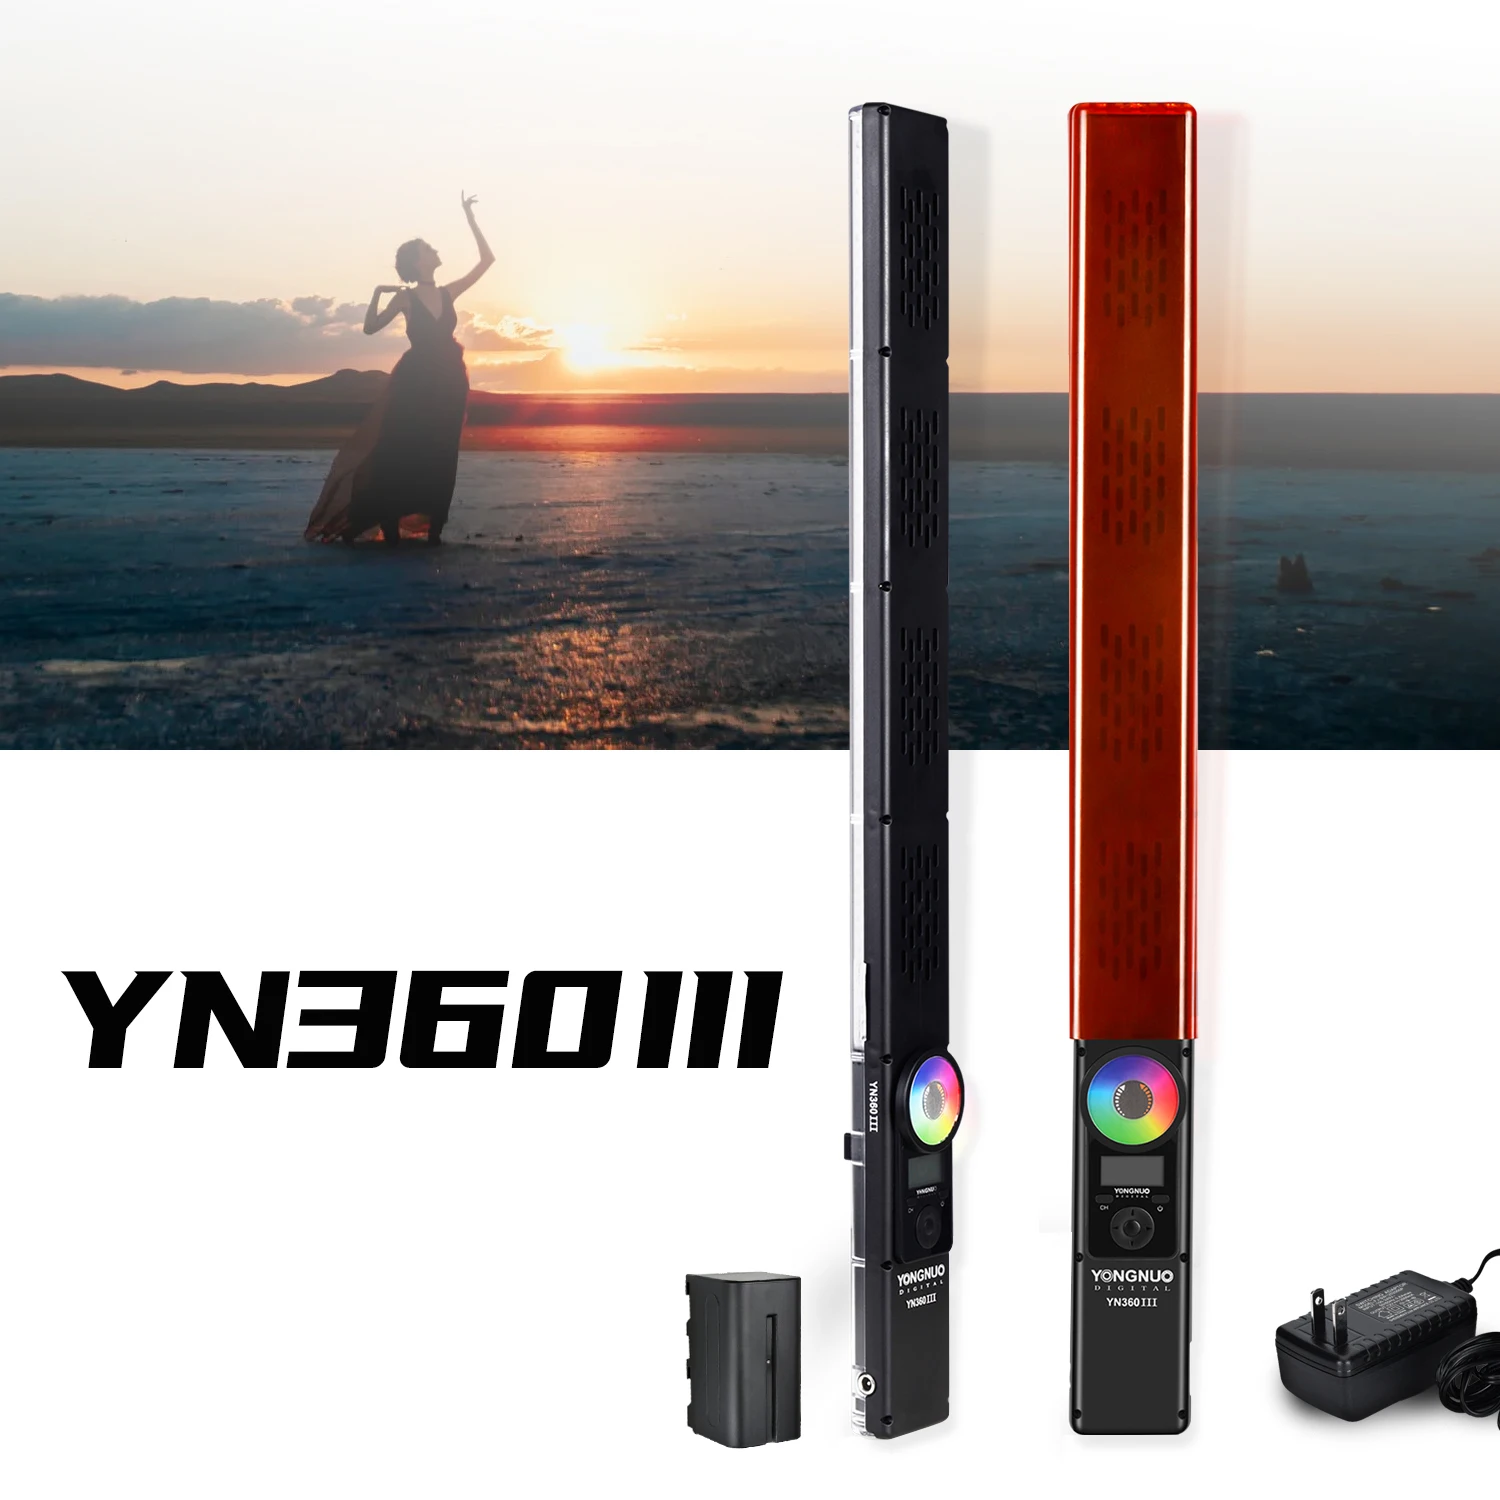 

YONGNUO YN360III 3200-5500K Bicolor+RGB Full Color Handheld LED Video Light Dimmable Fill Bar Touch Adjusting Mode